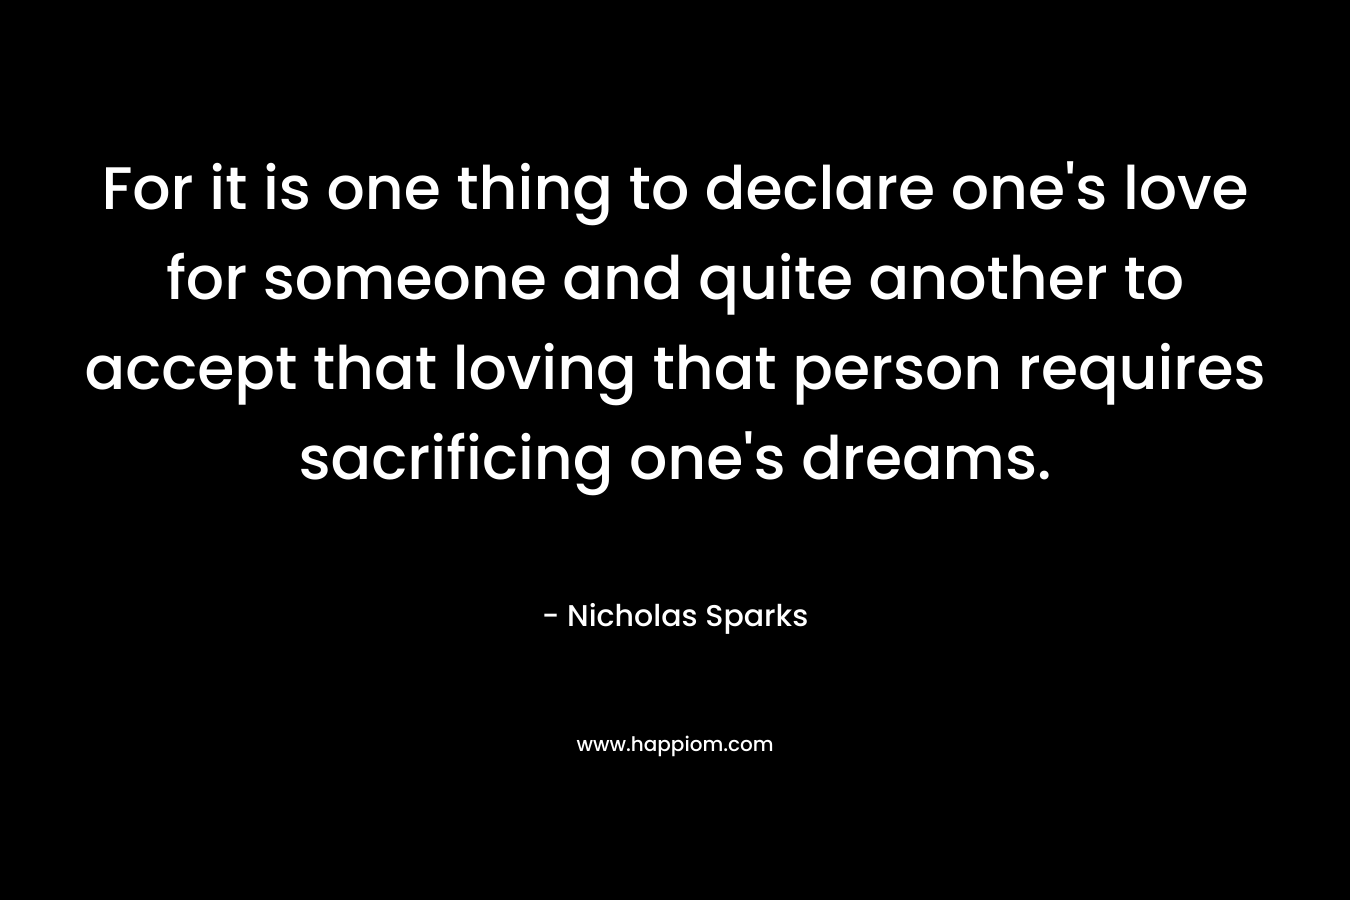 For it is one thing to declare one's love for someone and quite another to accept that loving that person requires sacrificing one's dreams.